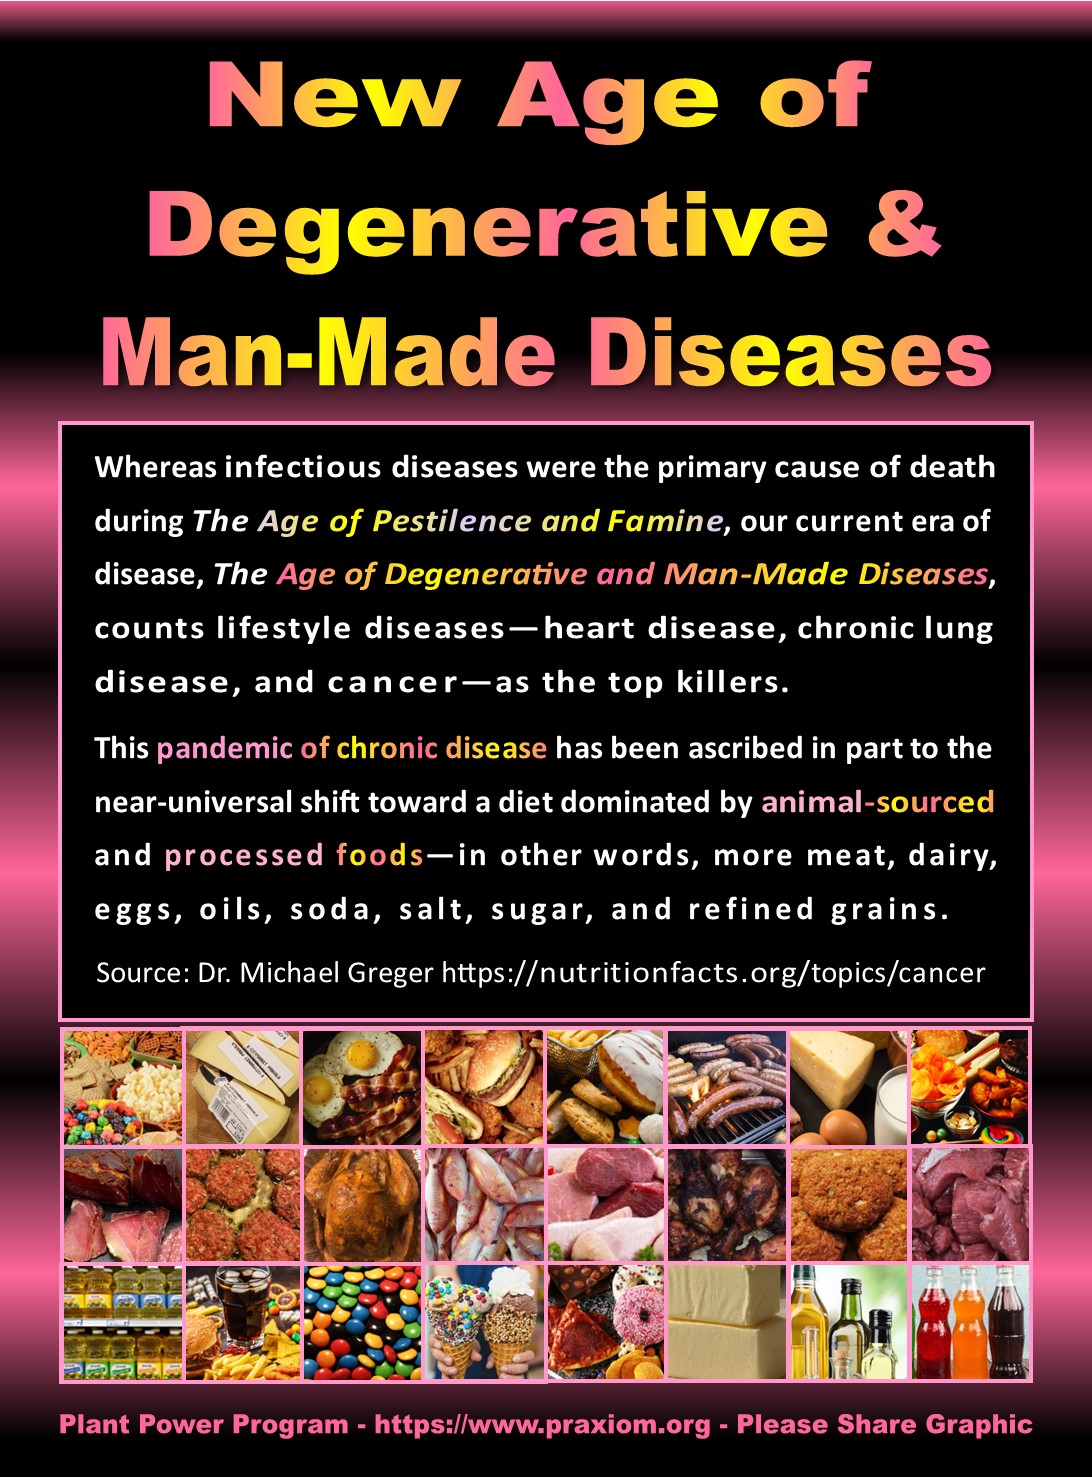 New Age of Man-Made Diseases